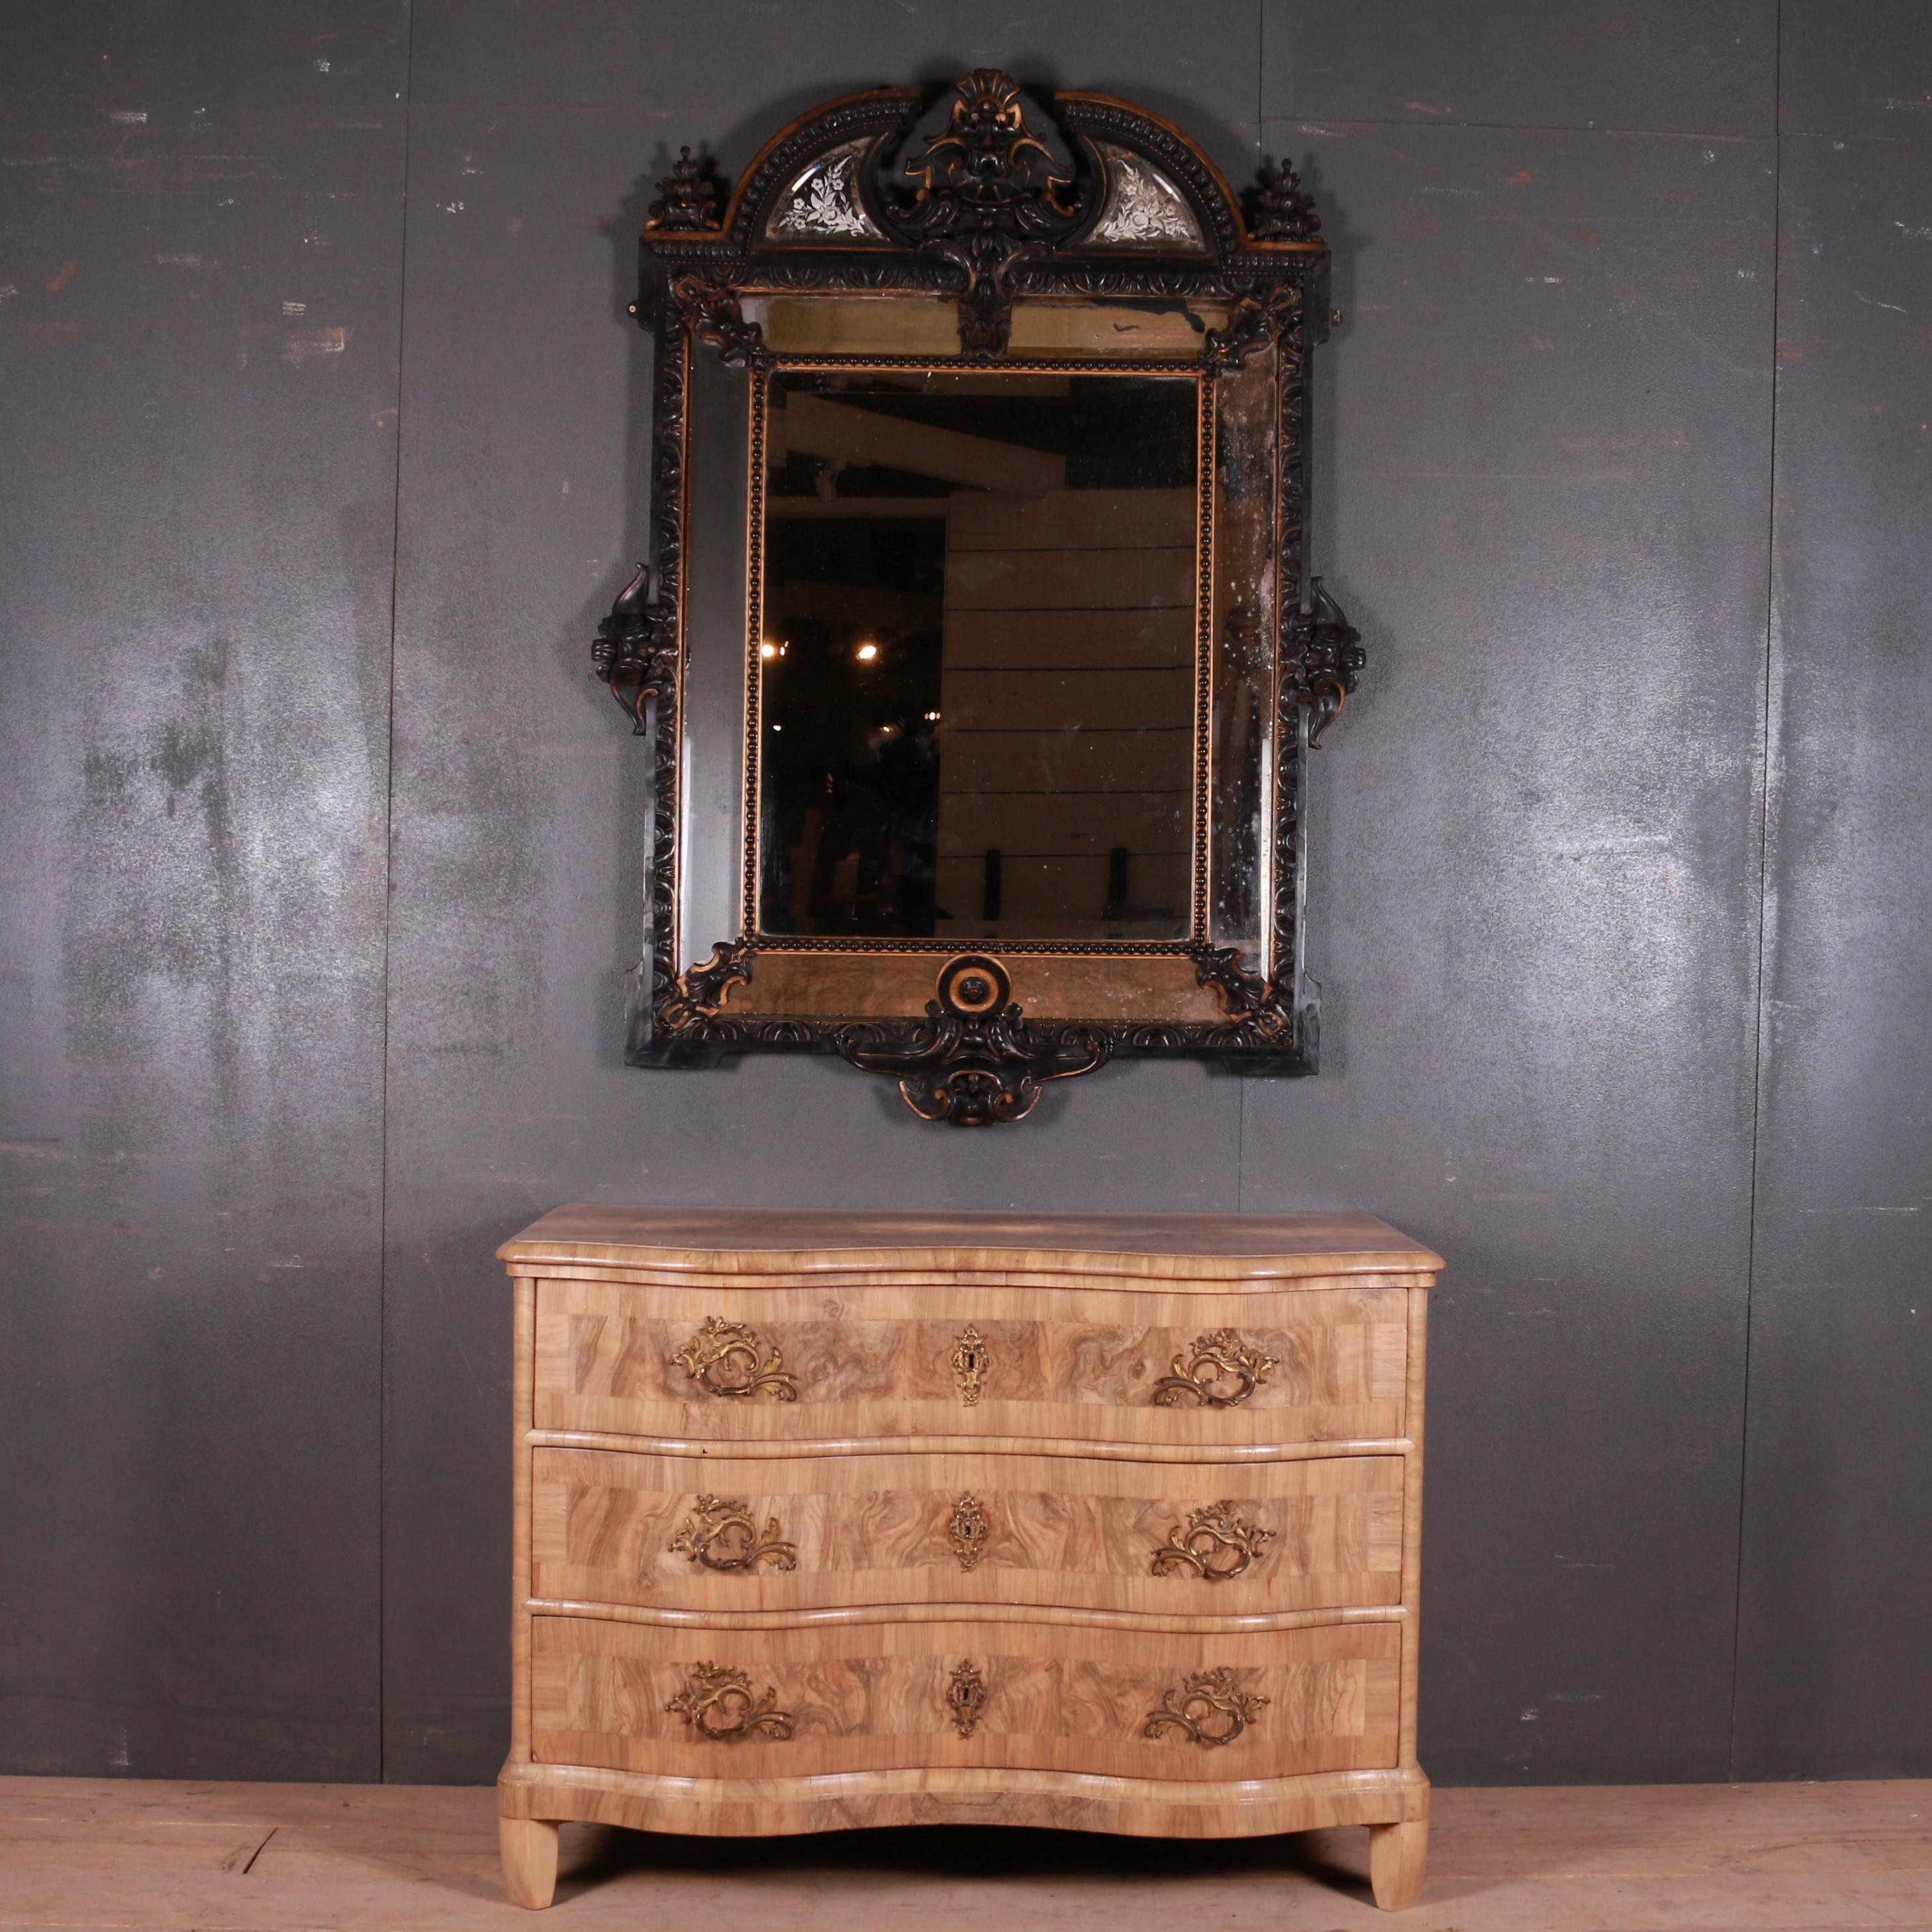 Stunning large 18th century gilt and ebonized baroque style cushion mirror, 1780.



Dimensions
43.5 inches (110 cms) wide
3.5 inches (9 cms) deep
58.5 inches (149 cms) high.